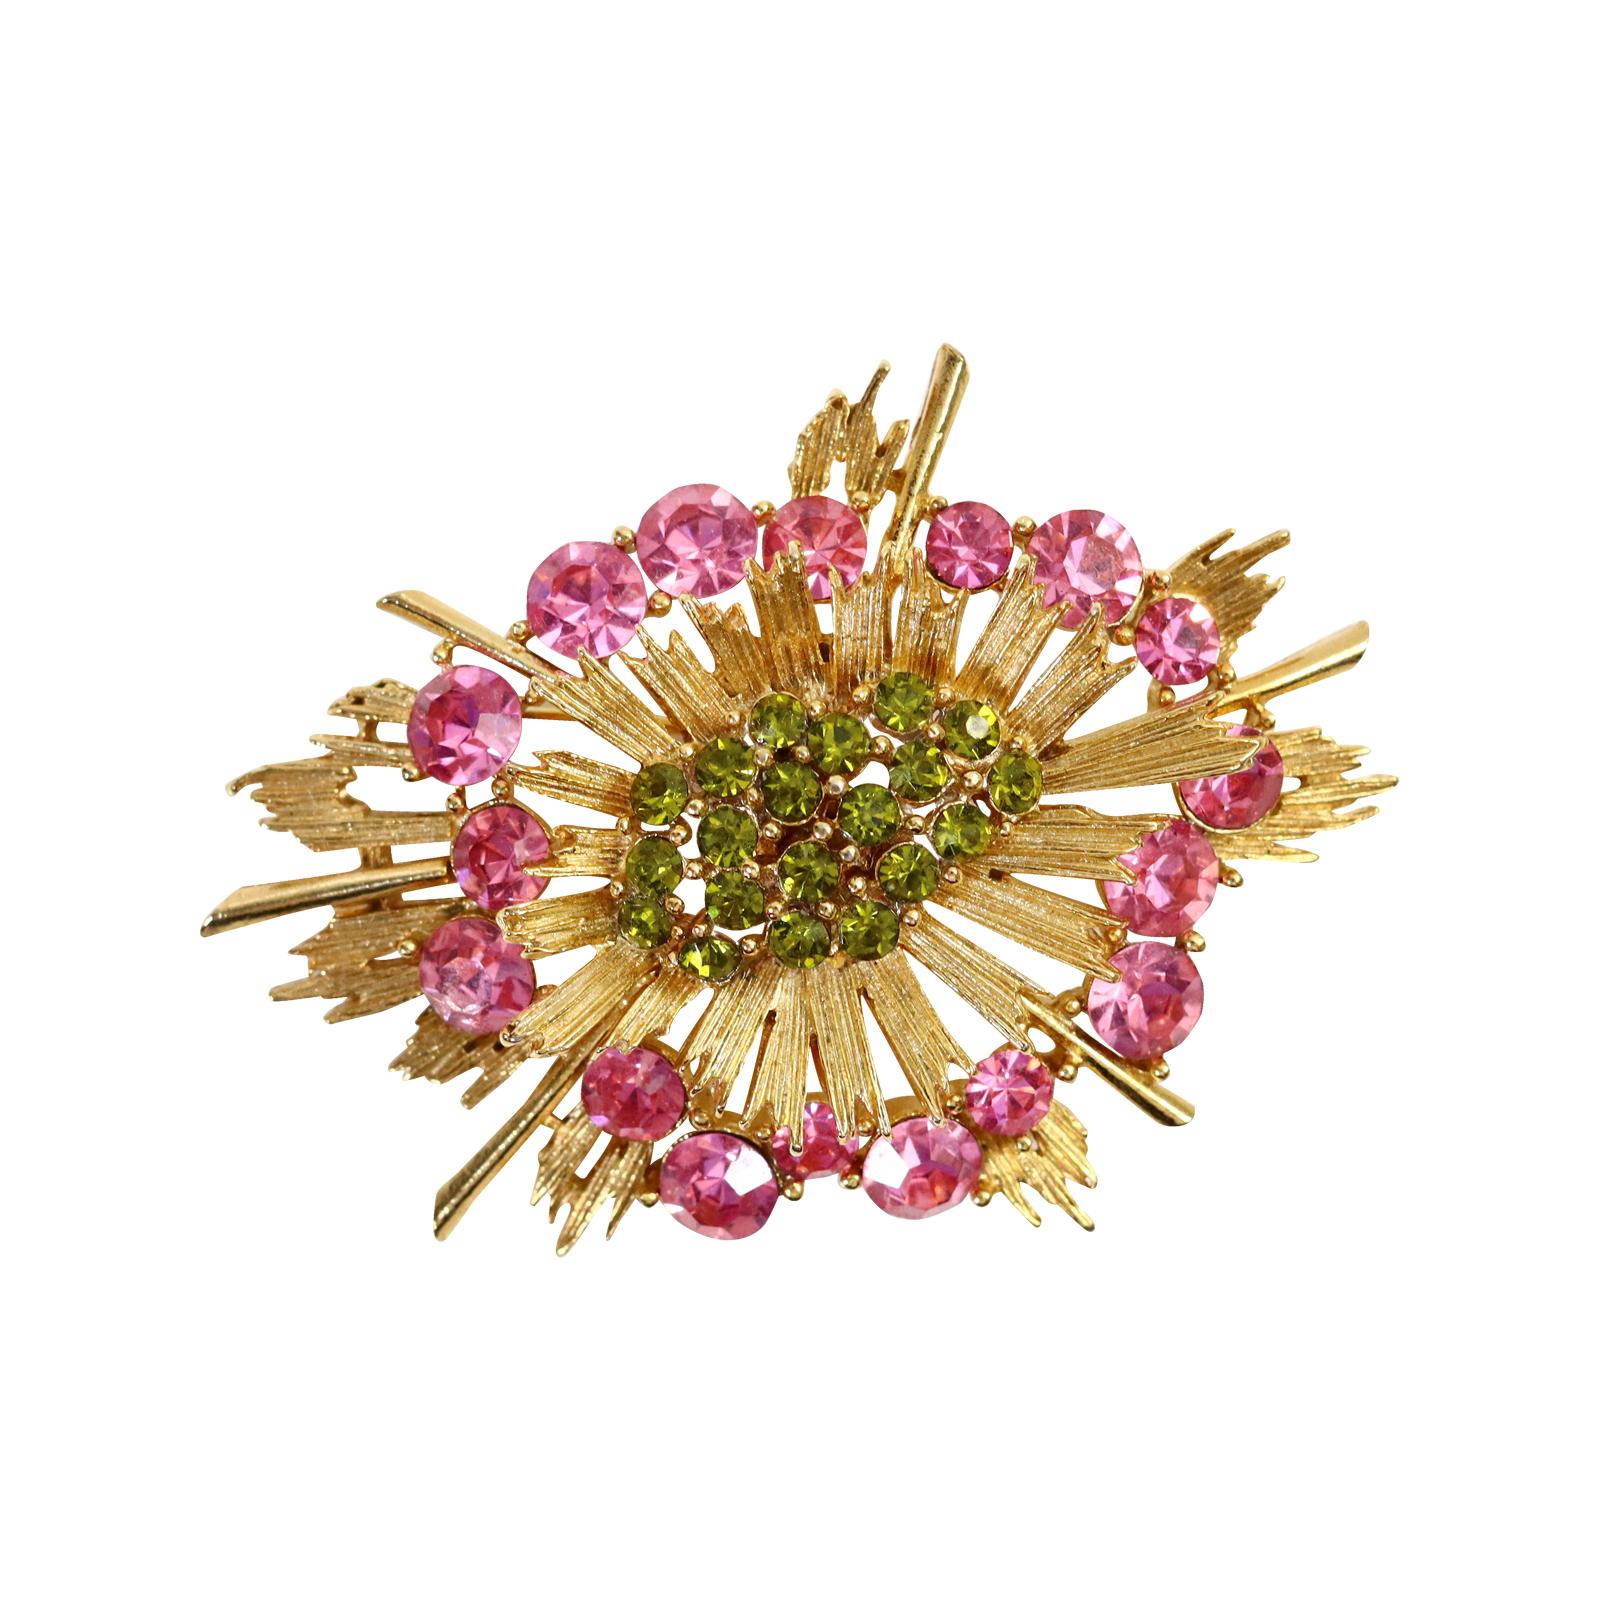 Vintage Lisner Gold with Green and Pink Crystals Brooch Circa 1980s. This brooch has three layers with the pink stones at the bottom and then a layer of gold and then a layer of green stones at the top all with very modern uneven edges of gold.  So